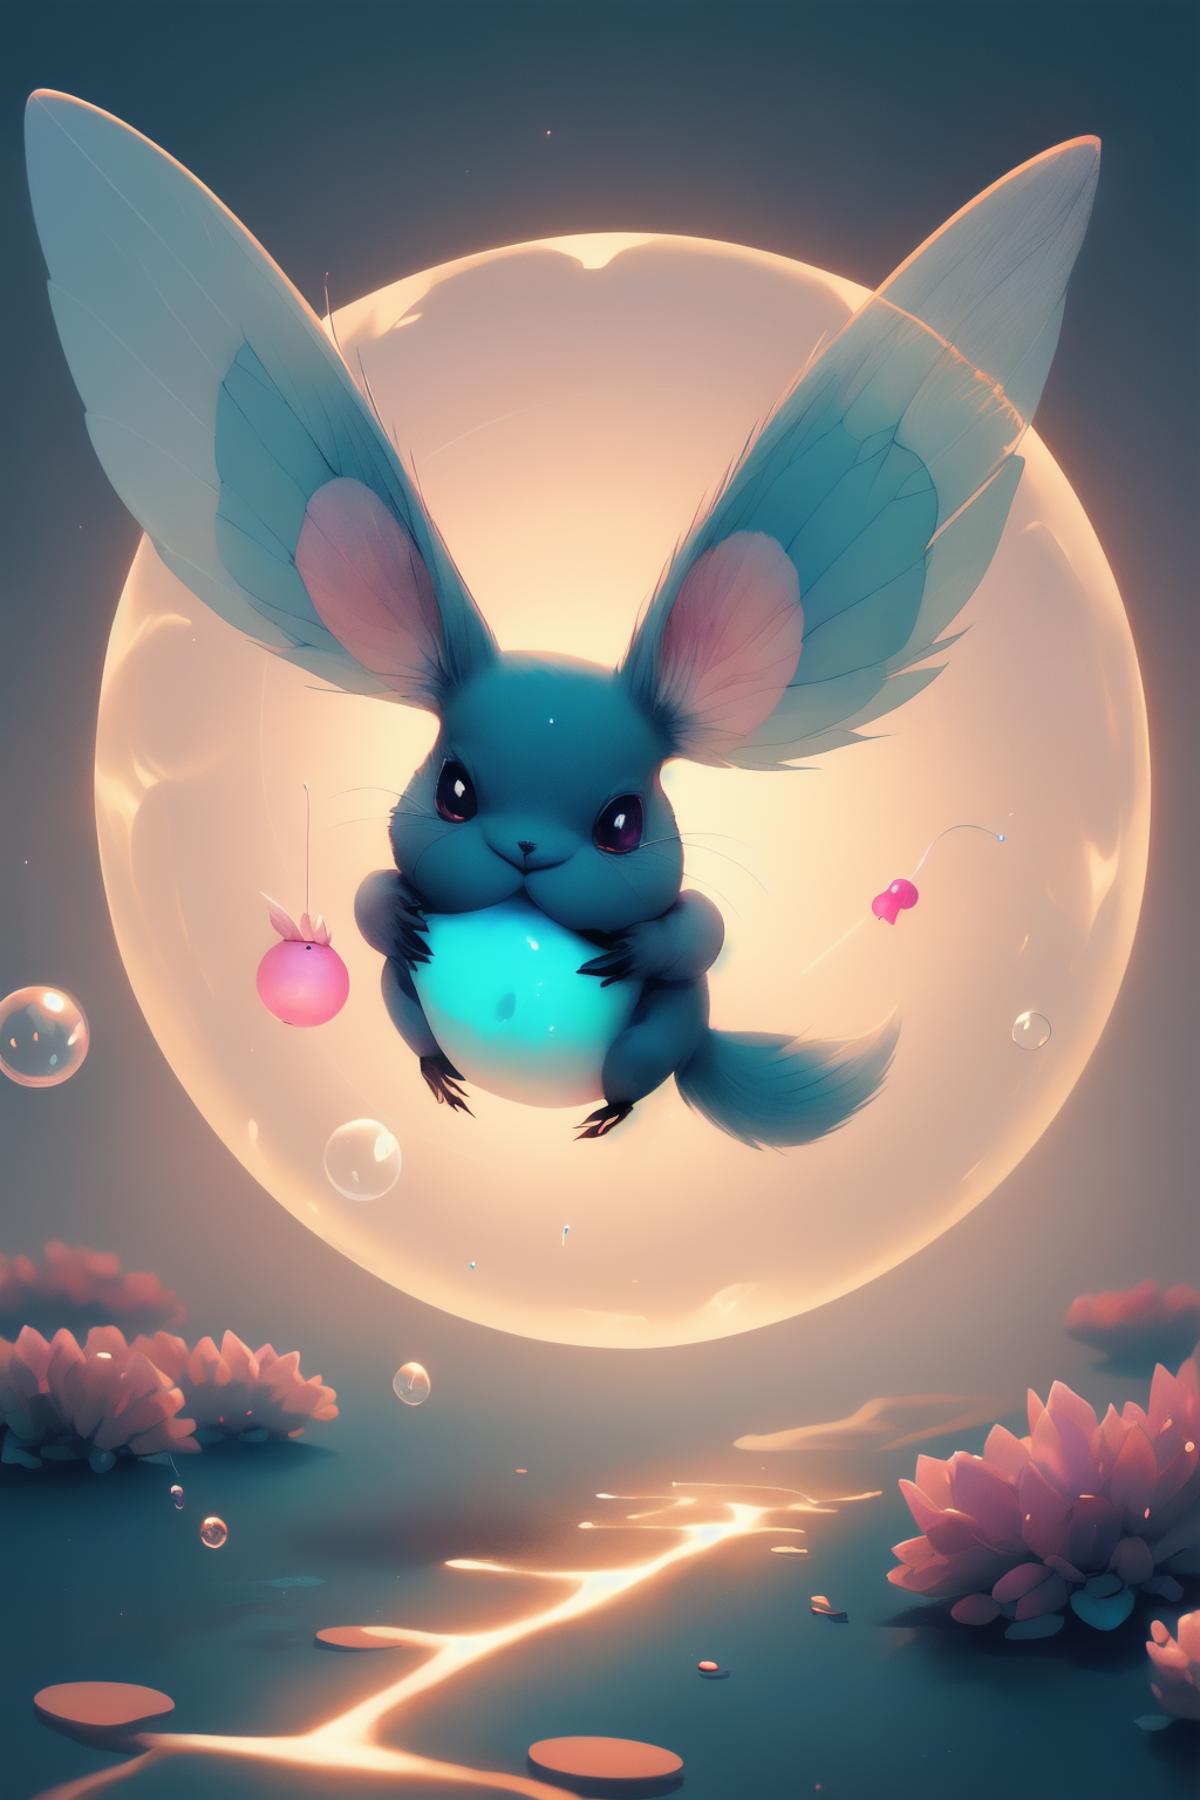 A cartoon blue mouse with wings sits inside a bubble.